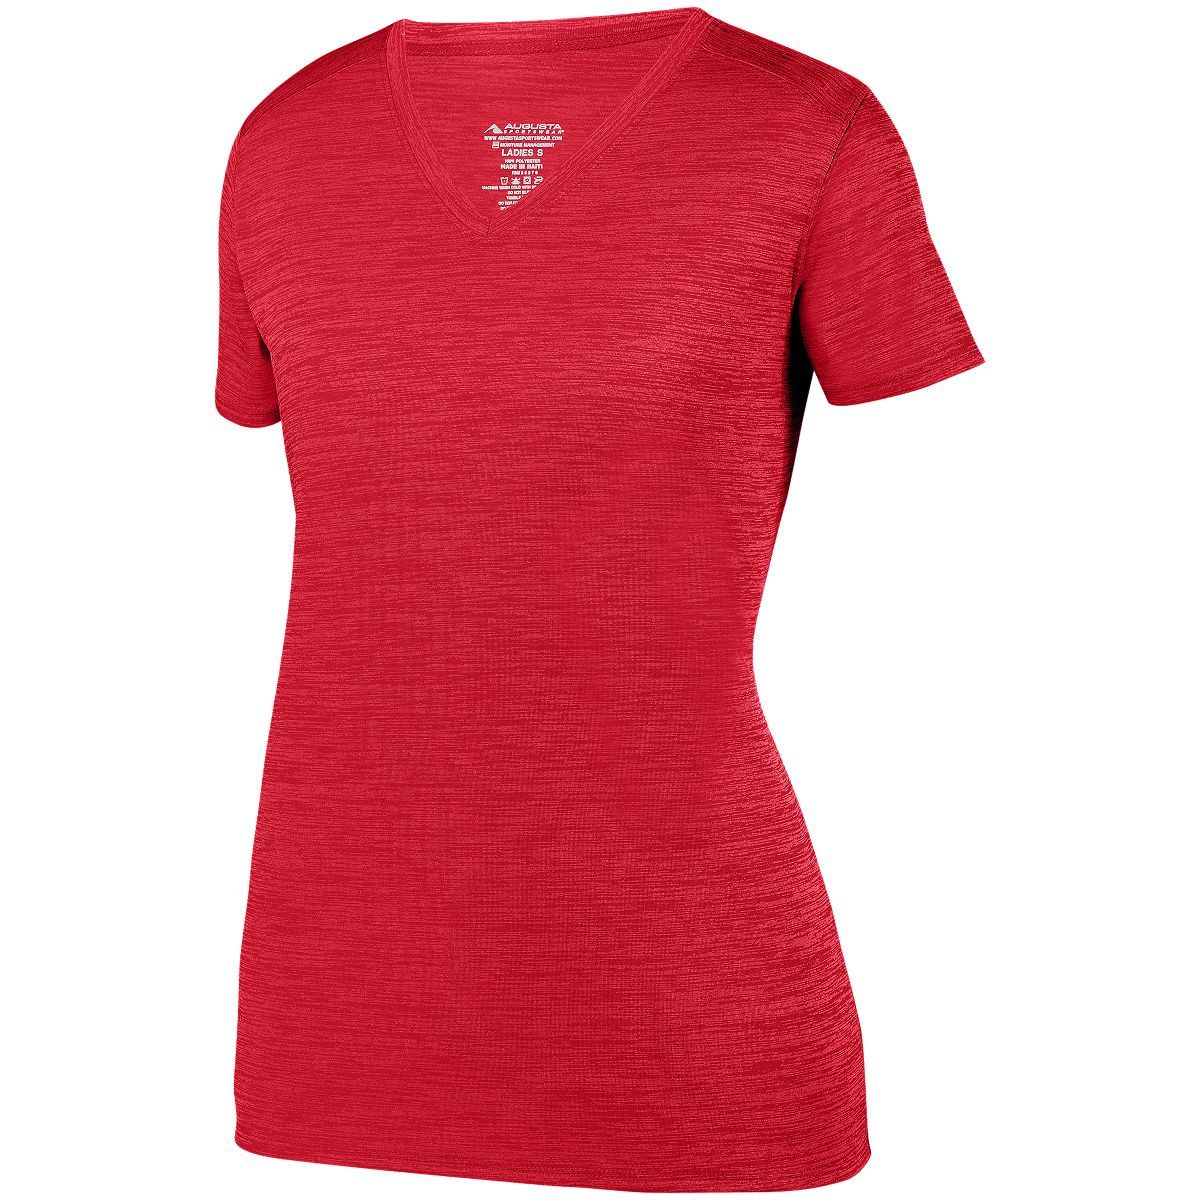 Augusta Sportswear Ladies Shadow Tonal Heather Training Tee in Red  -Part of the Ladies, Ladies-Tee-Shirt, T-Shirts, Augusta-Products, Shirts, Tonal-Fleece-Collection product lines at KanaleyCreations.com